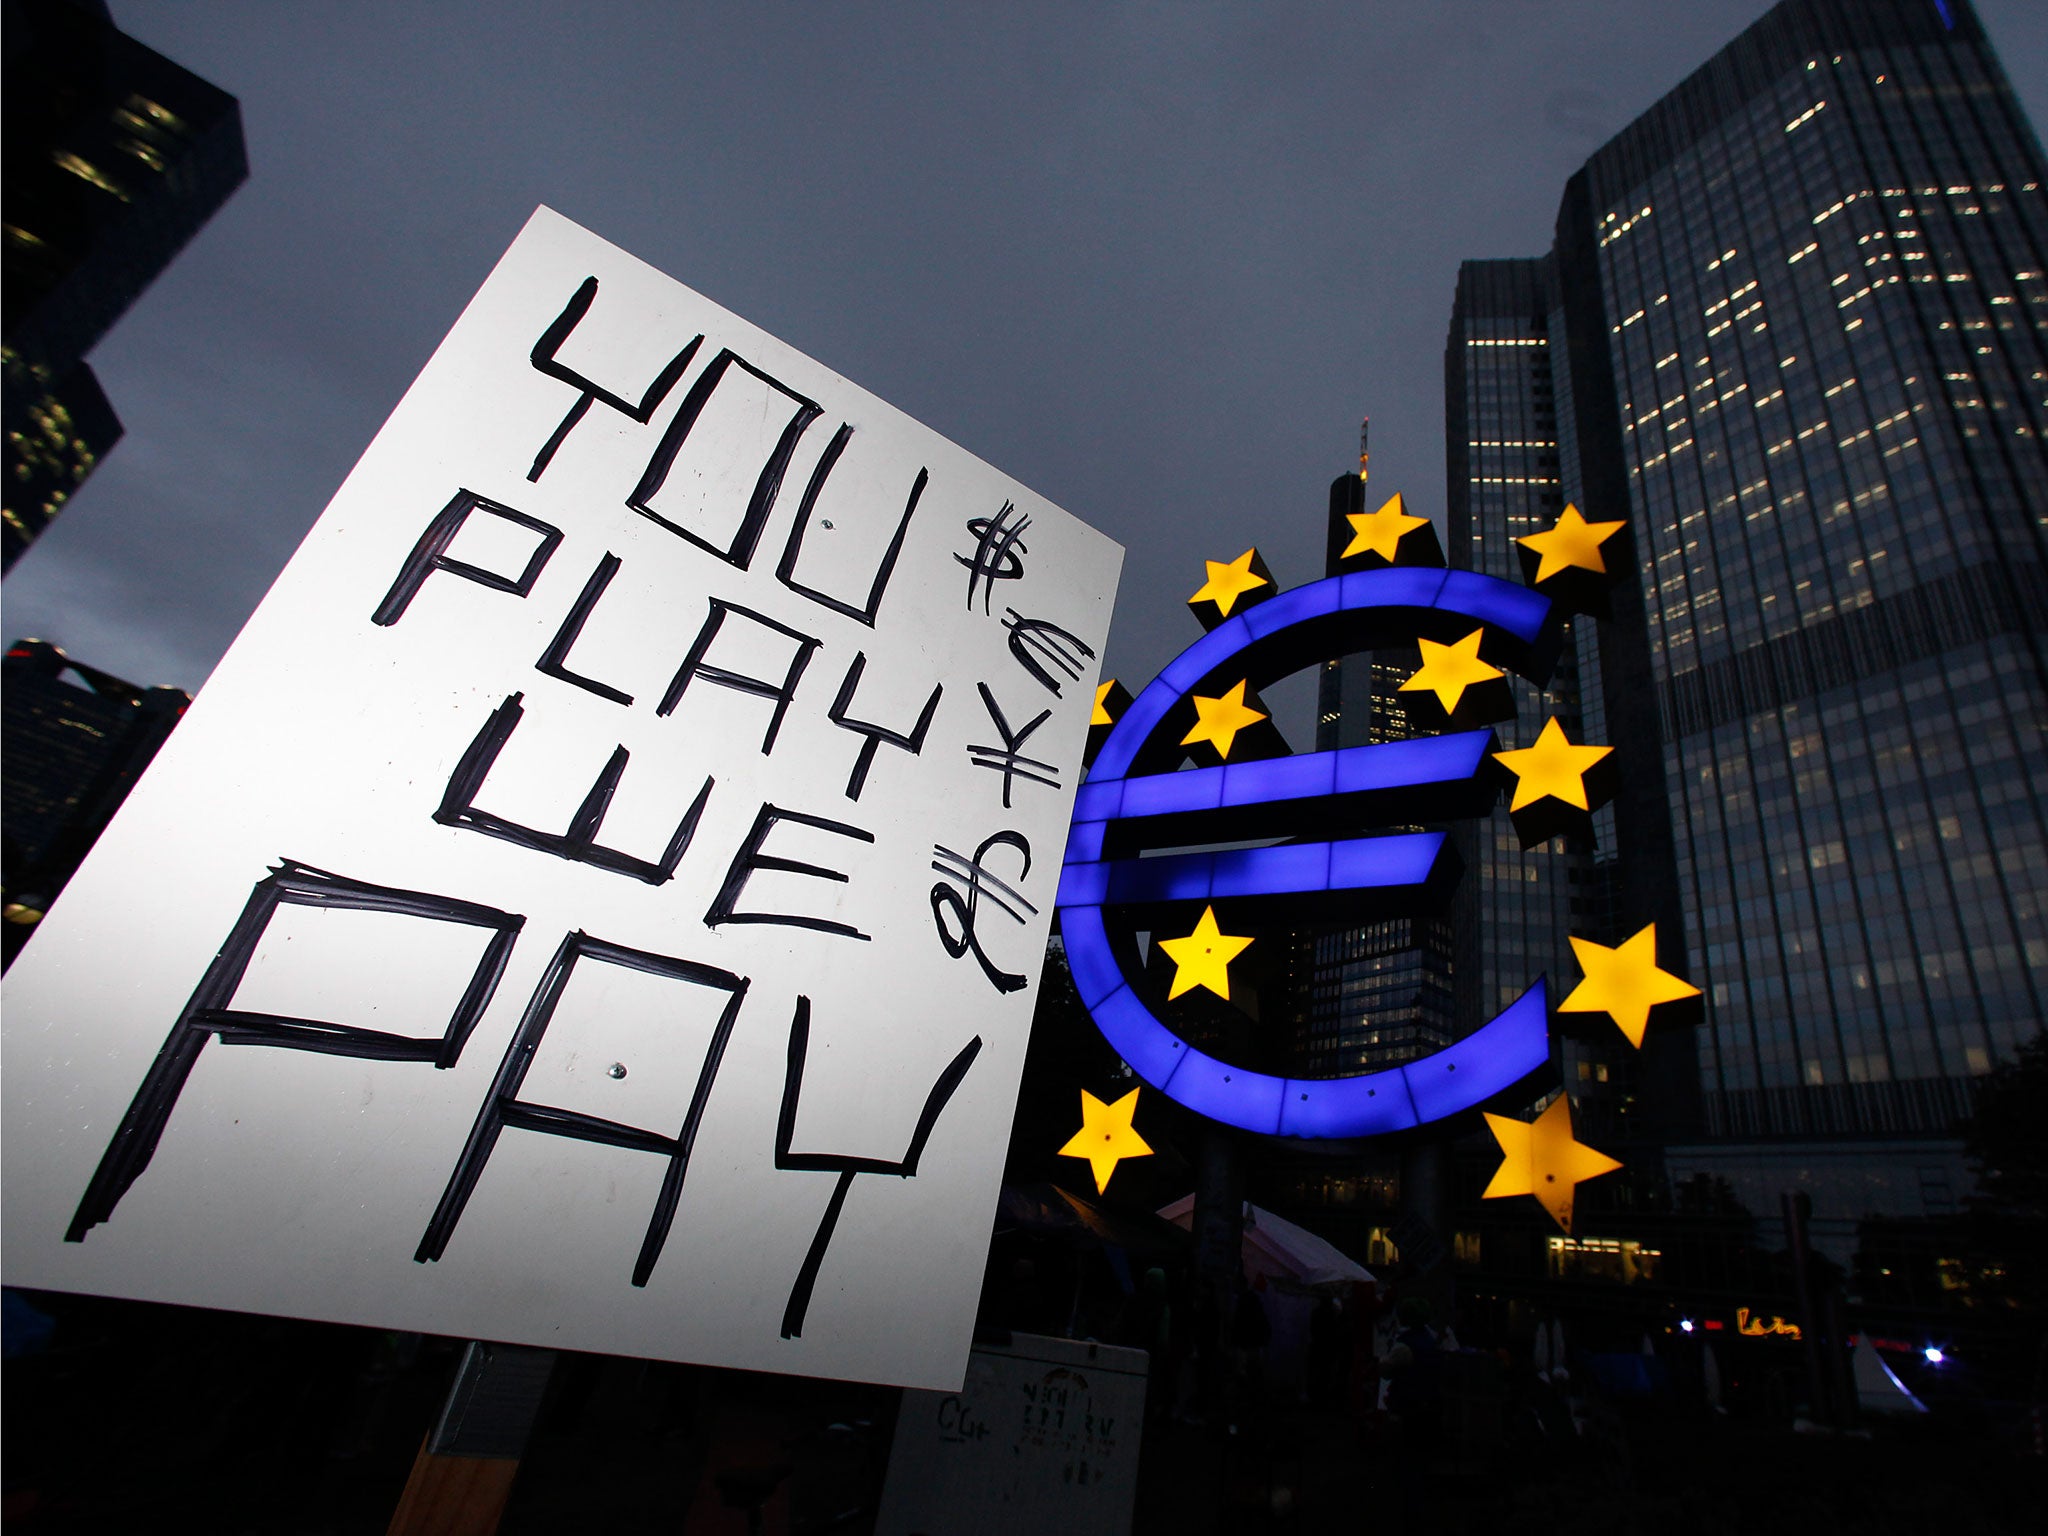 The European Central Bank was surrounded by protesters demonstrating against economic and financial policy as part of the Occupy movement in 2011